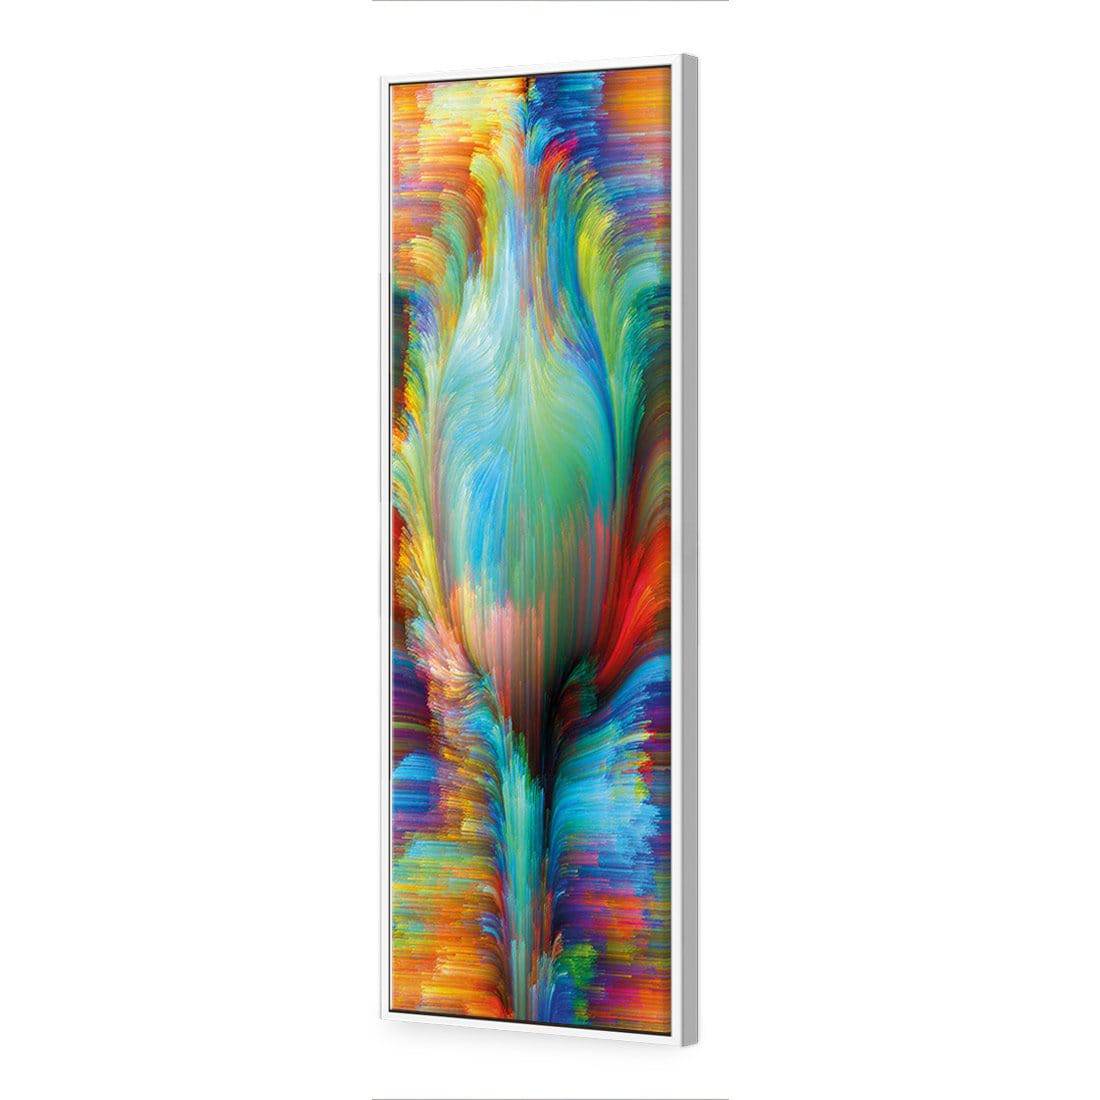 Fuzz Sprouting Canvas Art-Canvas-Wall Art Designs-60x20cm-Canvas - White Frame-Wall Art Designs